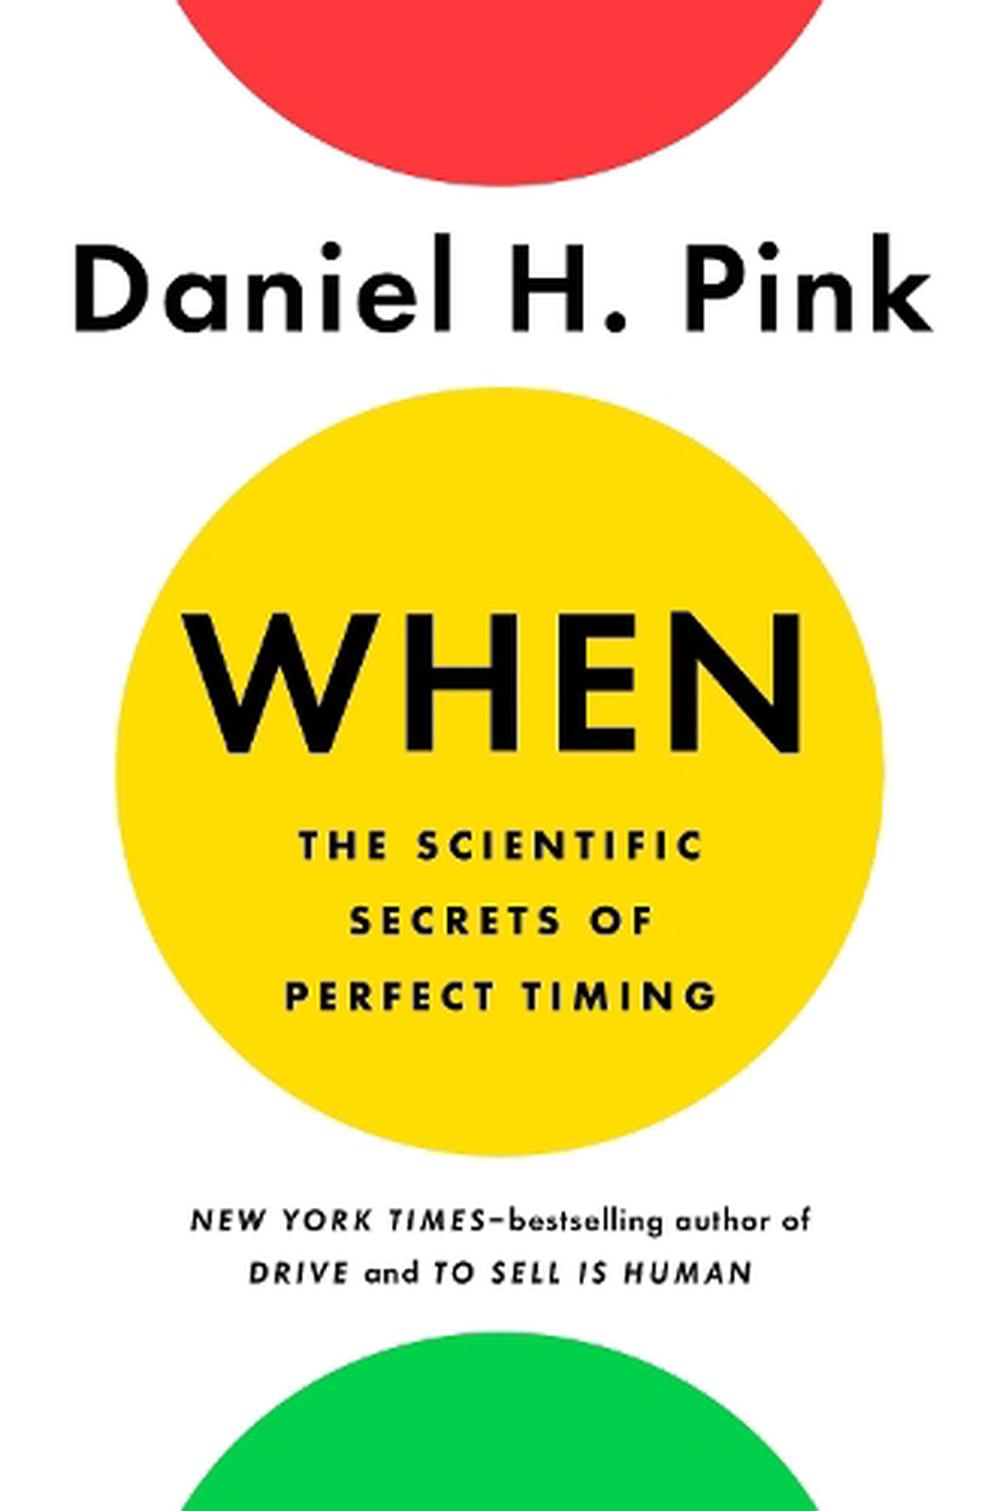 To Sell is Human by Daniel H. Pink